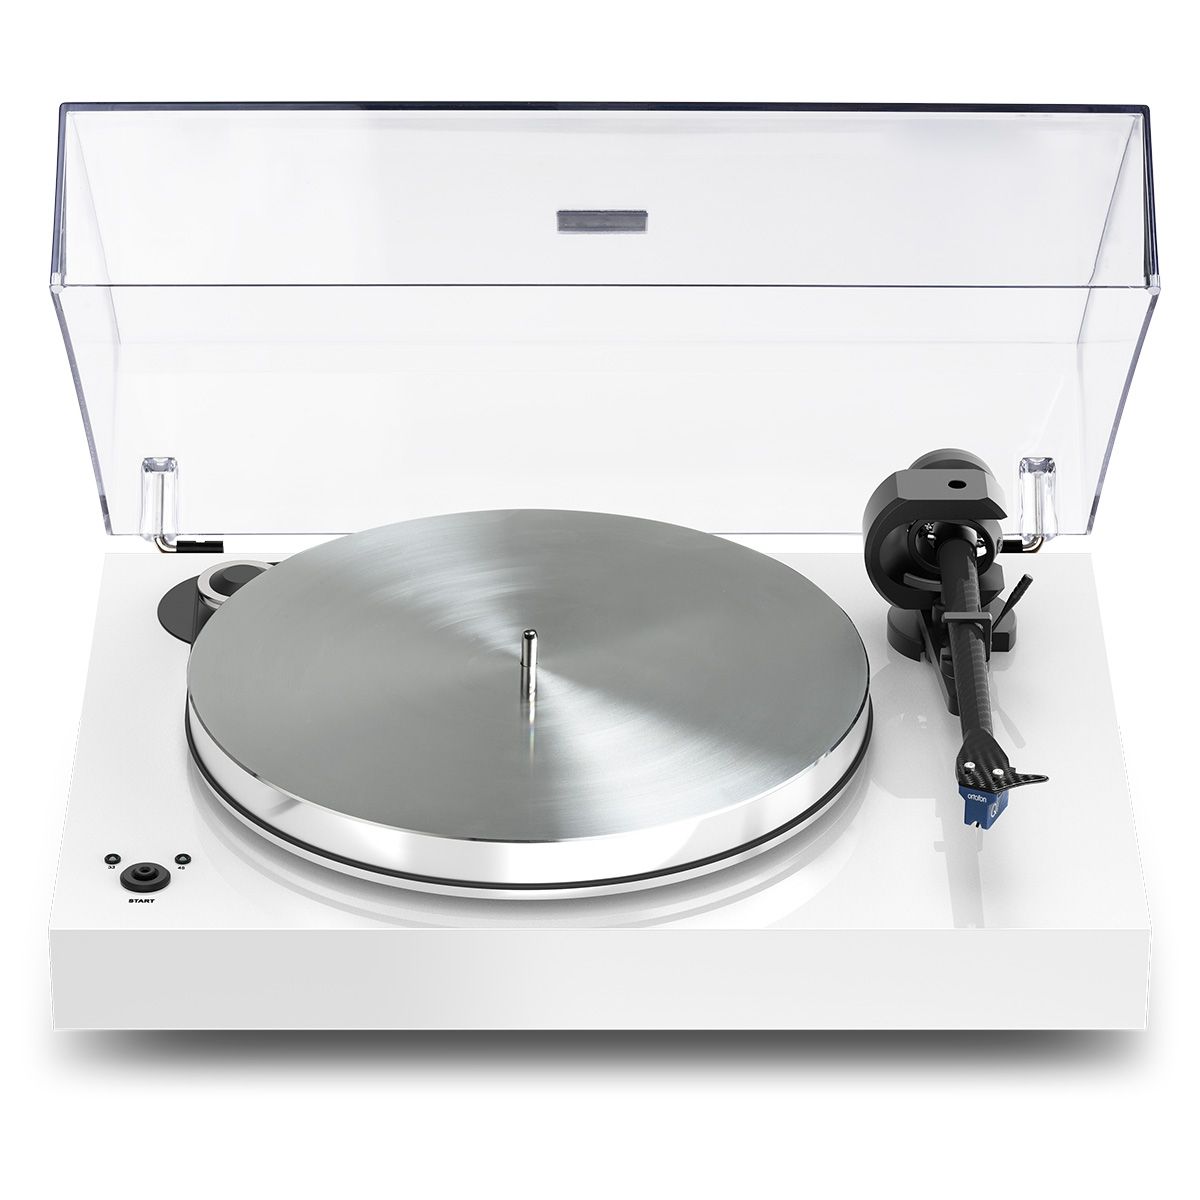 
Pro-Ject X8 Evolution Turntable
